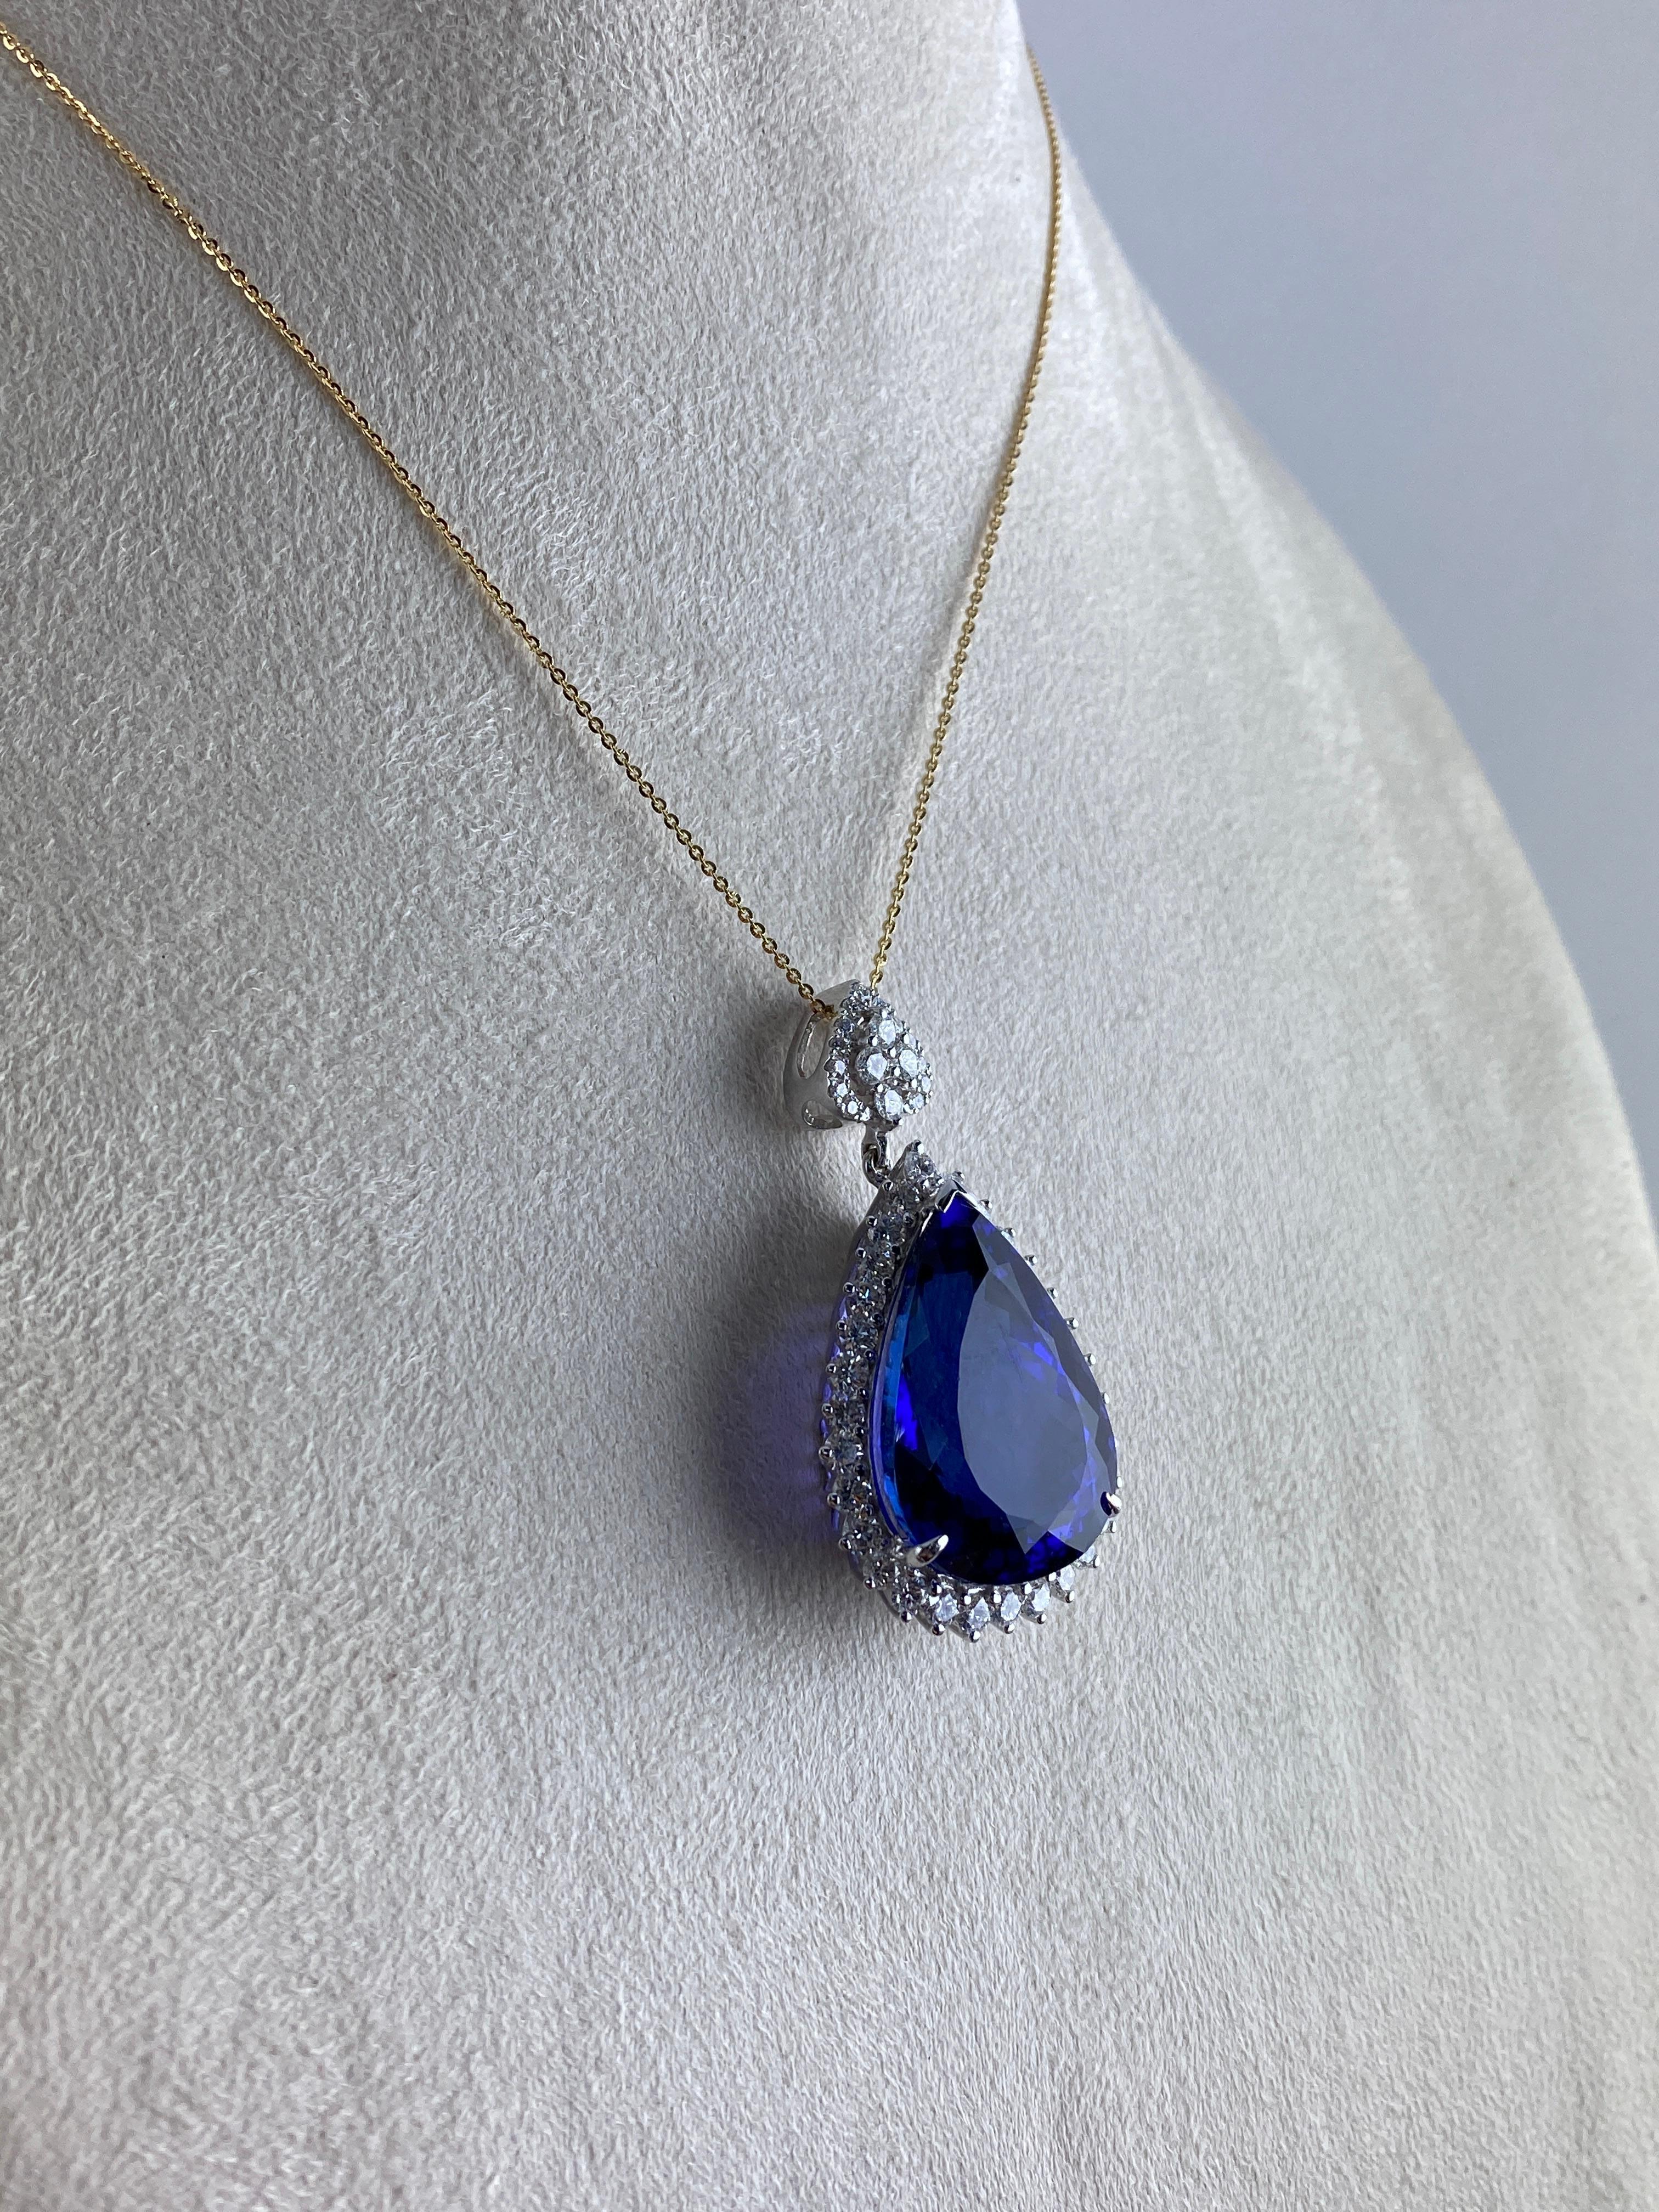 Contemporary Natural 18K White Gold 44.7 Carat Tanzanite Pendent Necklace with Cert, Rare For Sale